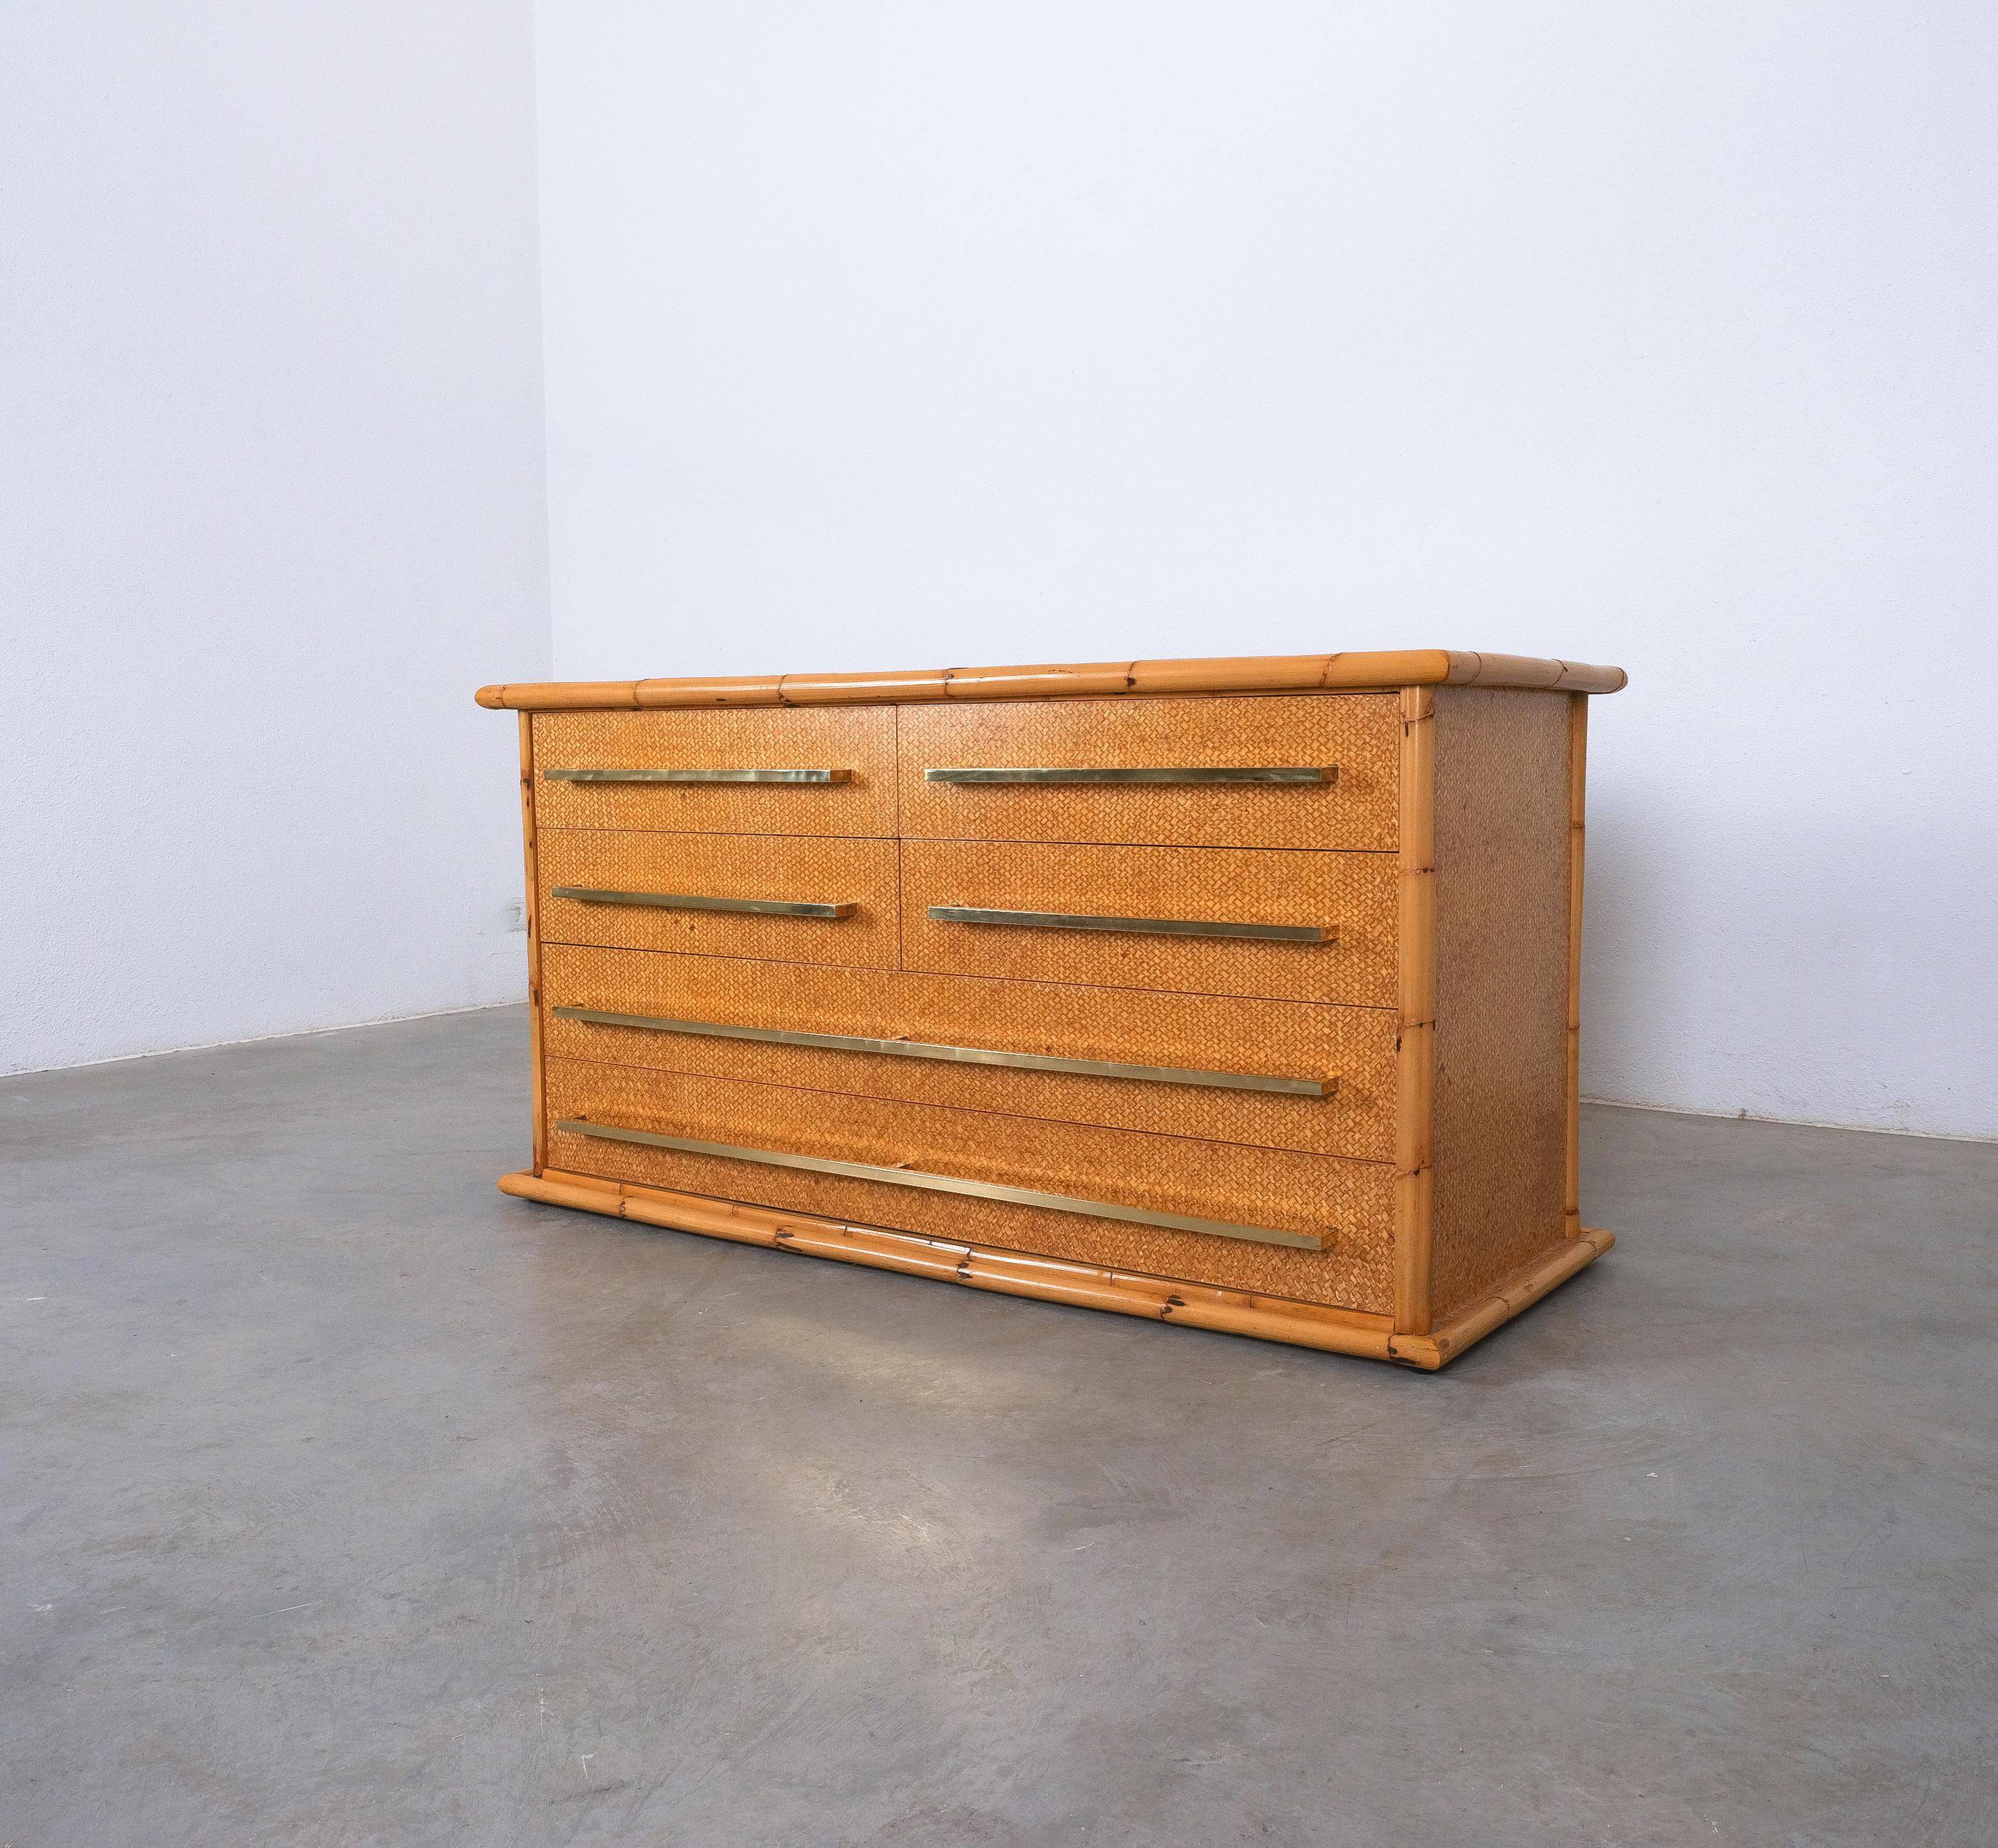 Polished Bamboo Cane and Brass Commode Chest of Drawers by Vivai del Sud, Italy, 1975 For Sale